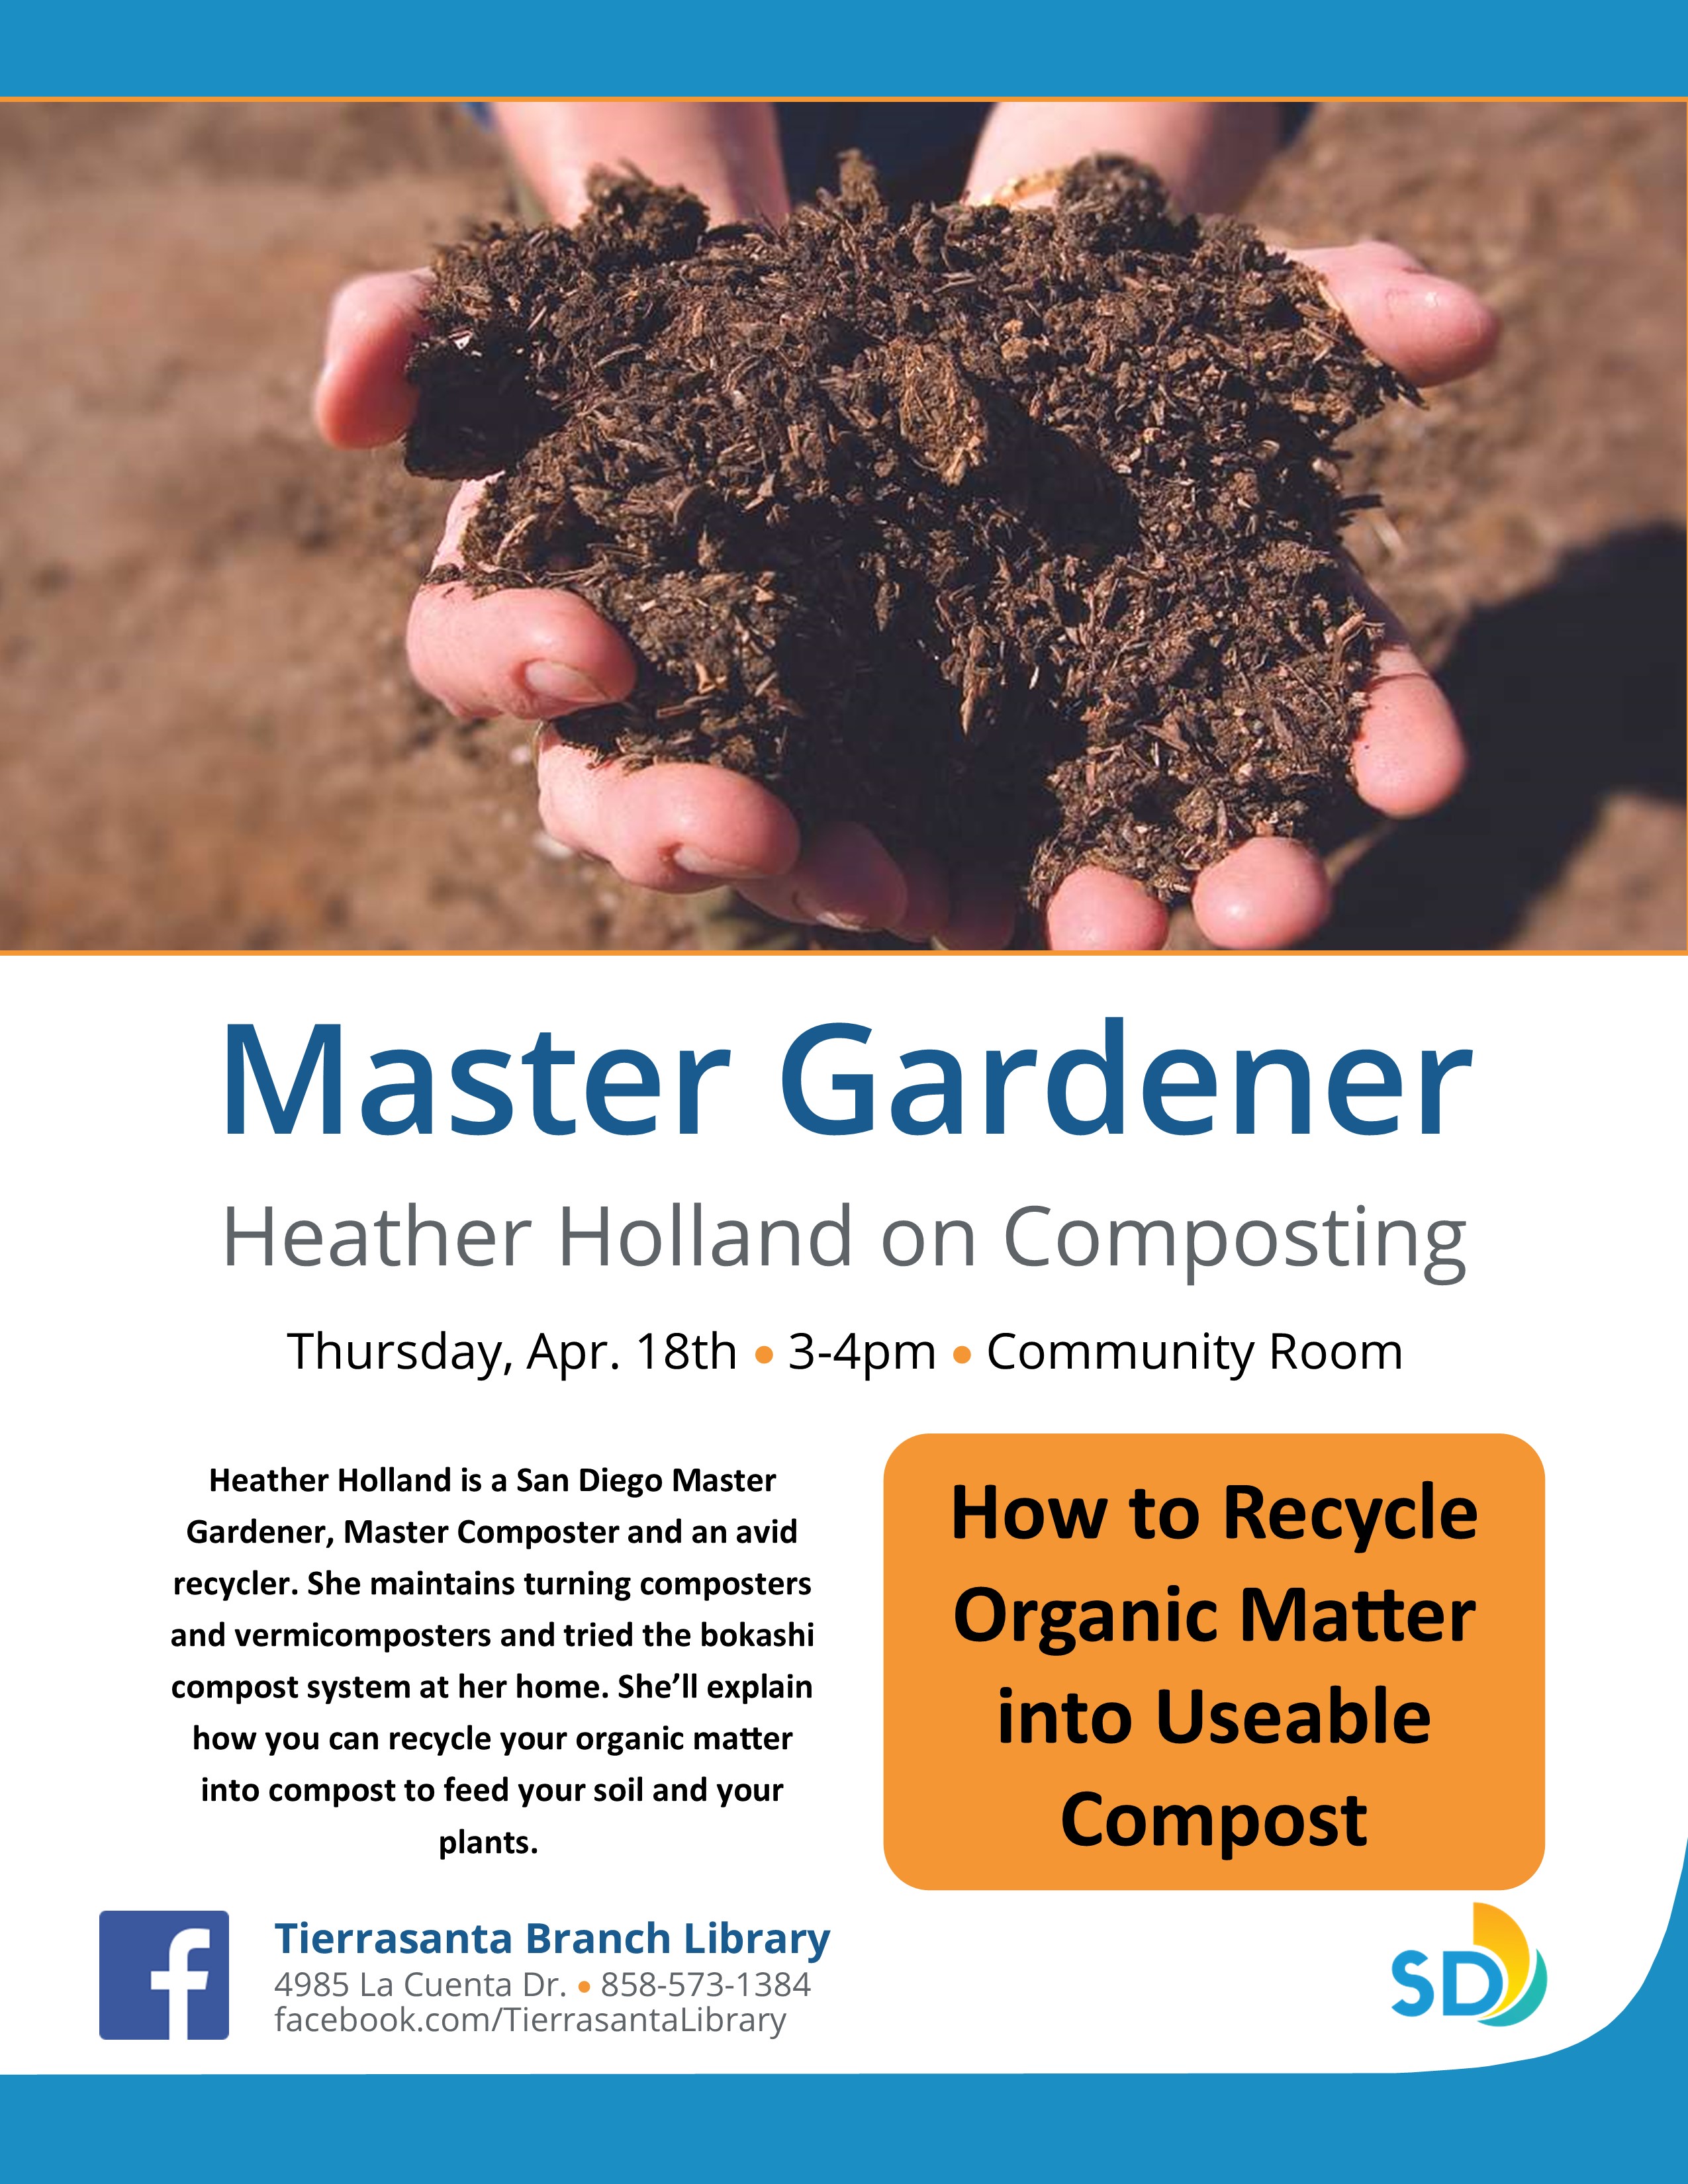 Flyer with the image of hands holding compost/dirt